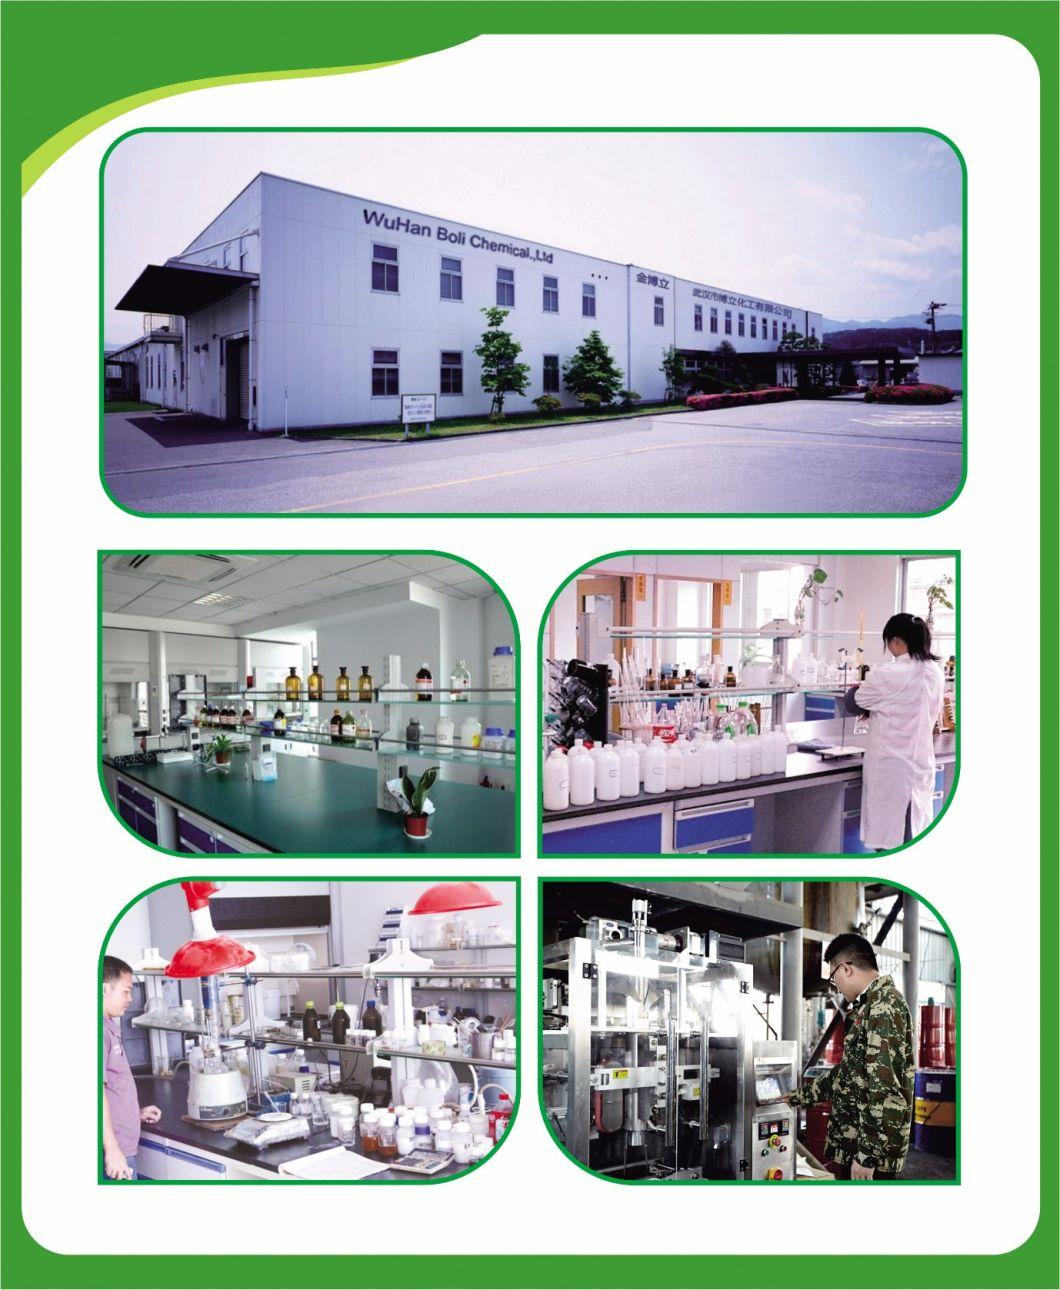 Constructional and Car Manufacturing Footwear Making Furniture Industry Favorite Good Low Cost No Harm to Human Chloroprene Contact Glue